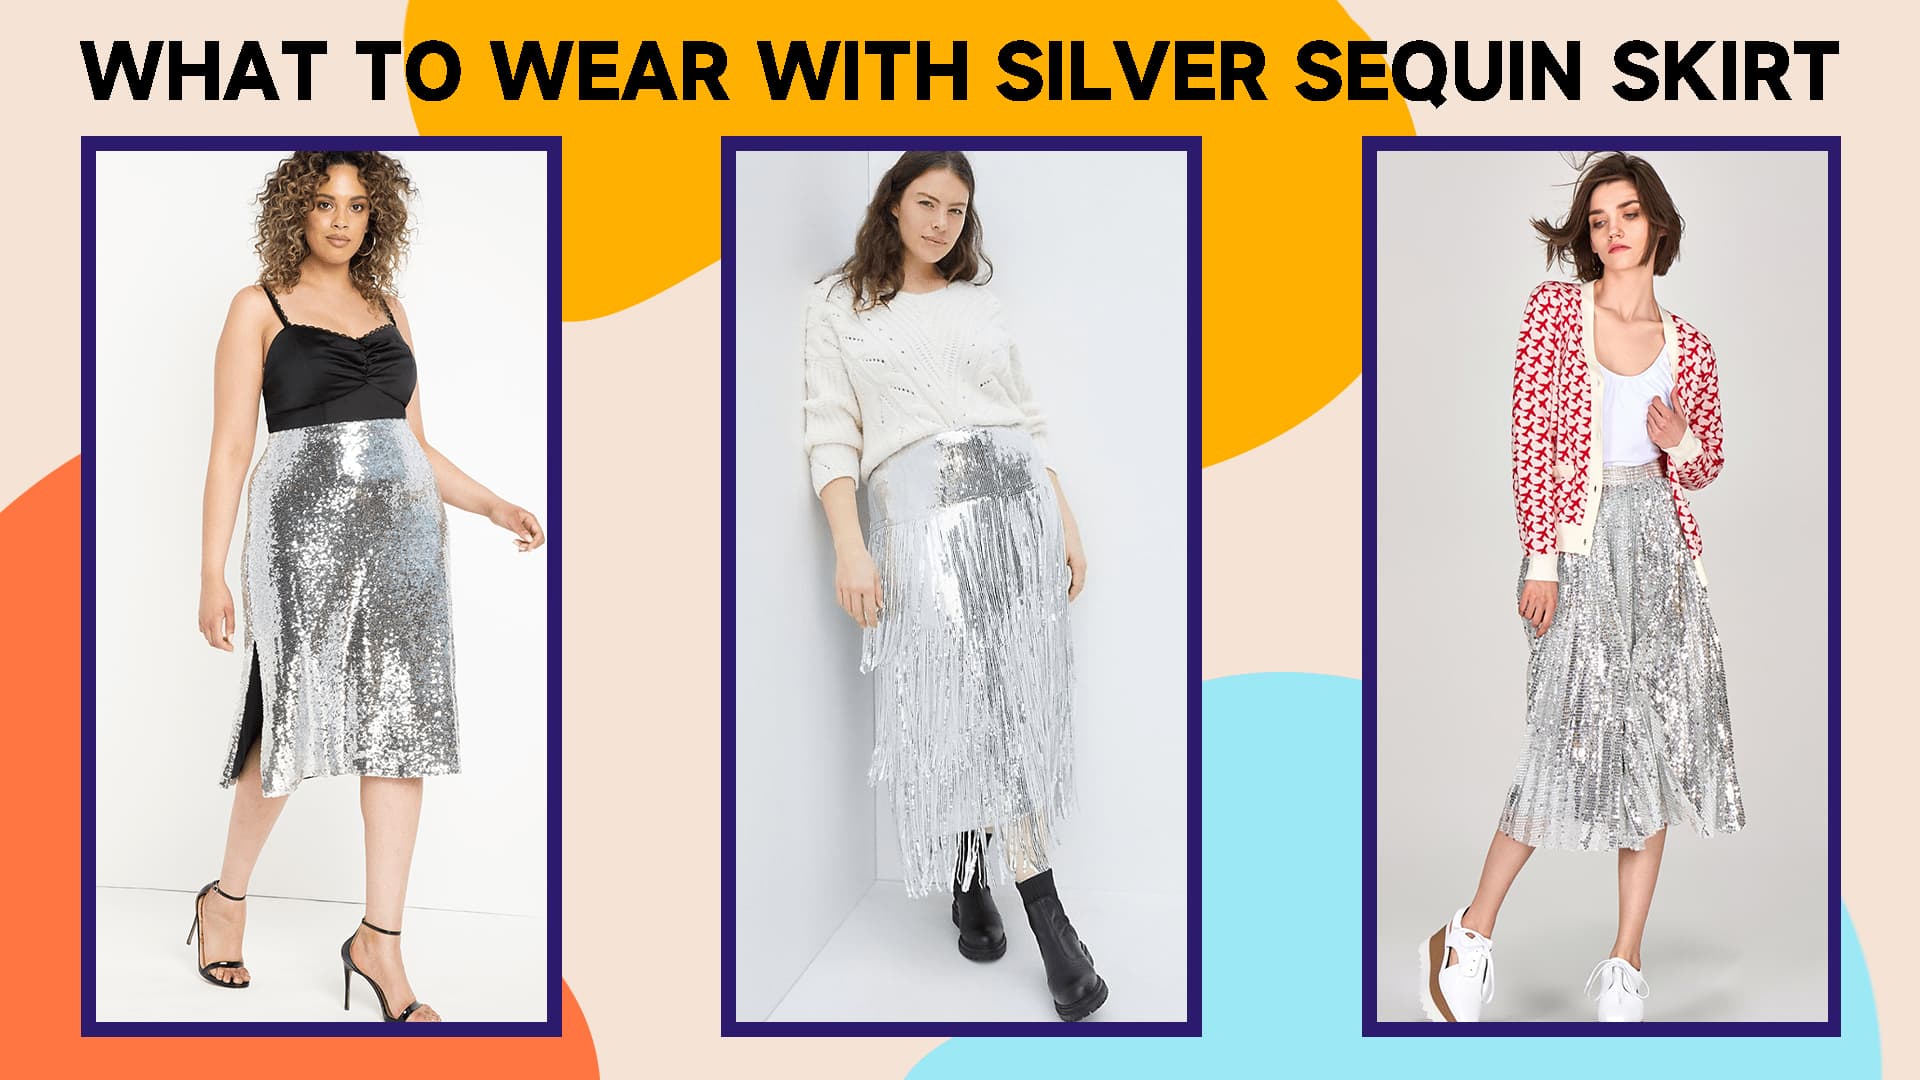 What To Wear With Silver Sequin Skirt？